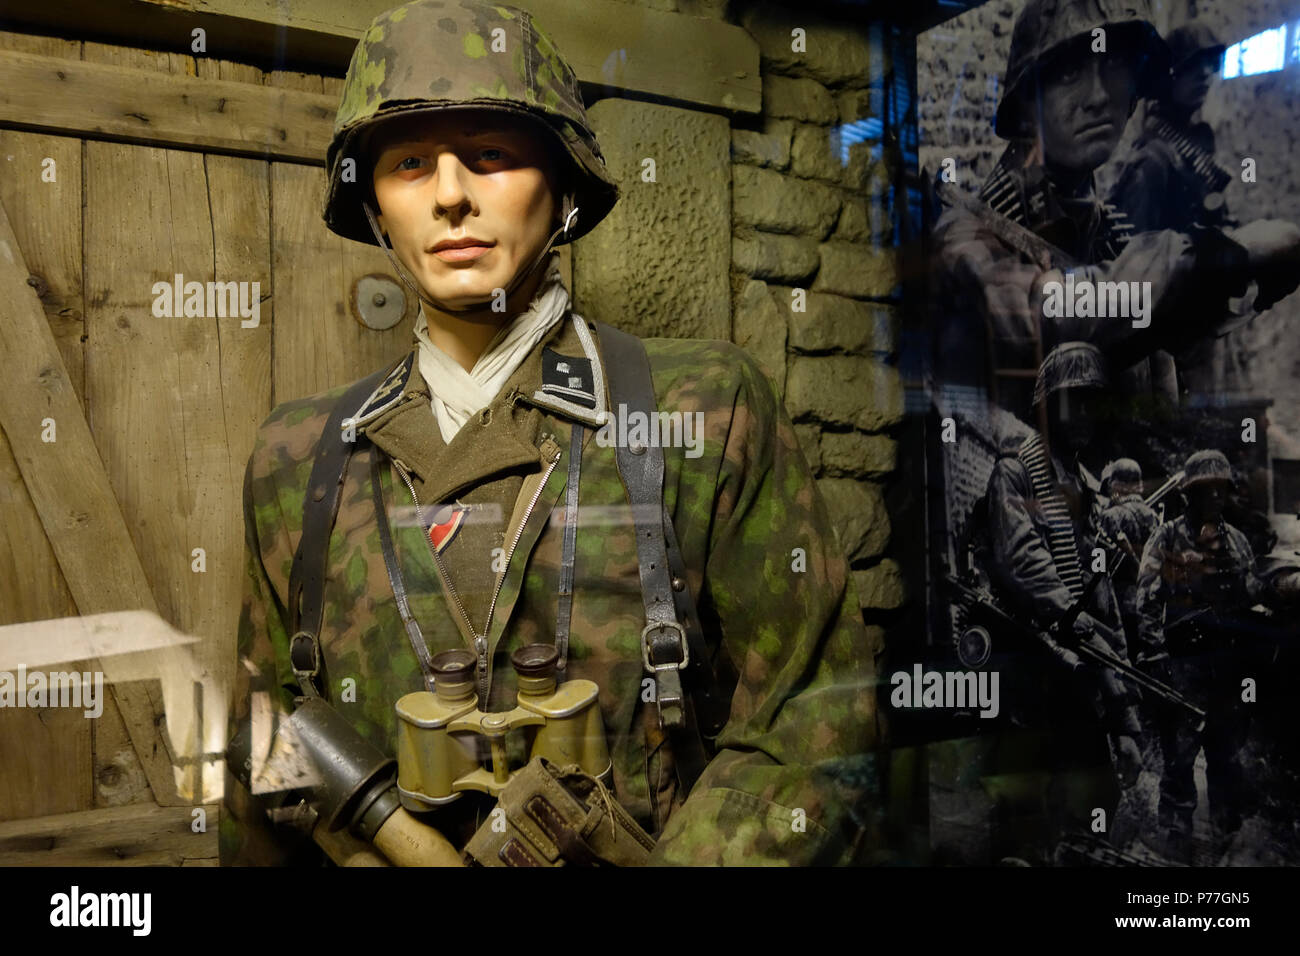 German WWII soldier in camouflage battledress, Overlord Museum near Omaha Beach about WW2  D-Day, Colleville-sur-Mer, Normandy, France Stock Photo